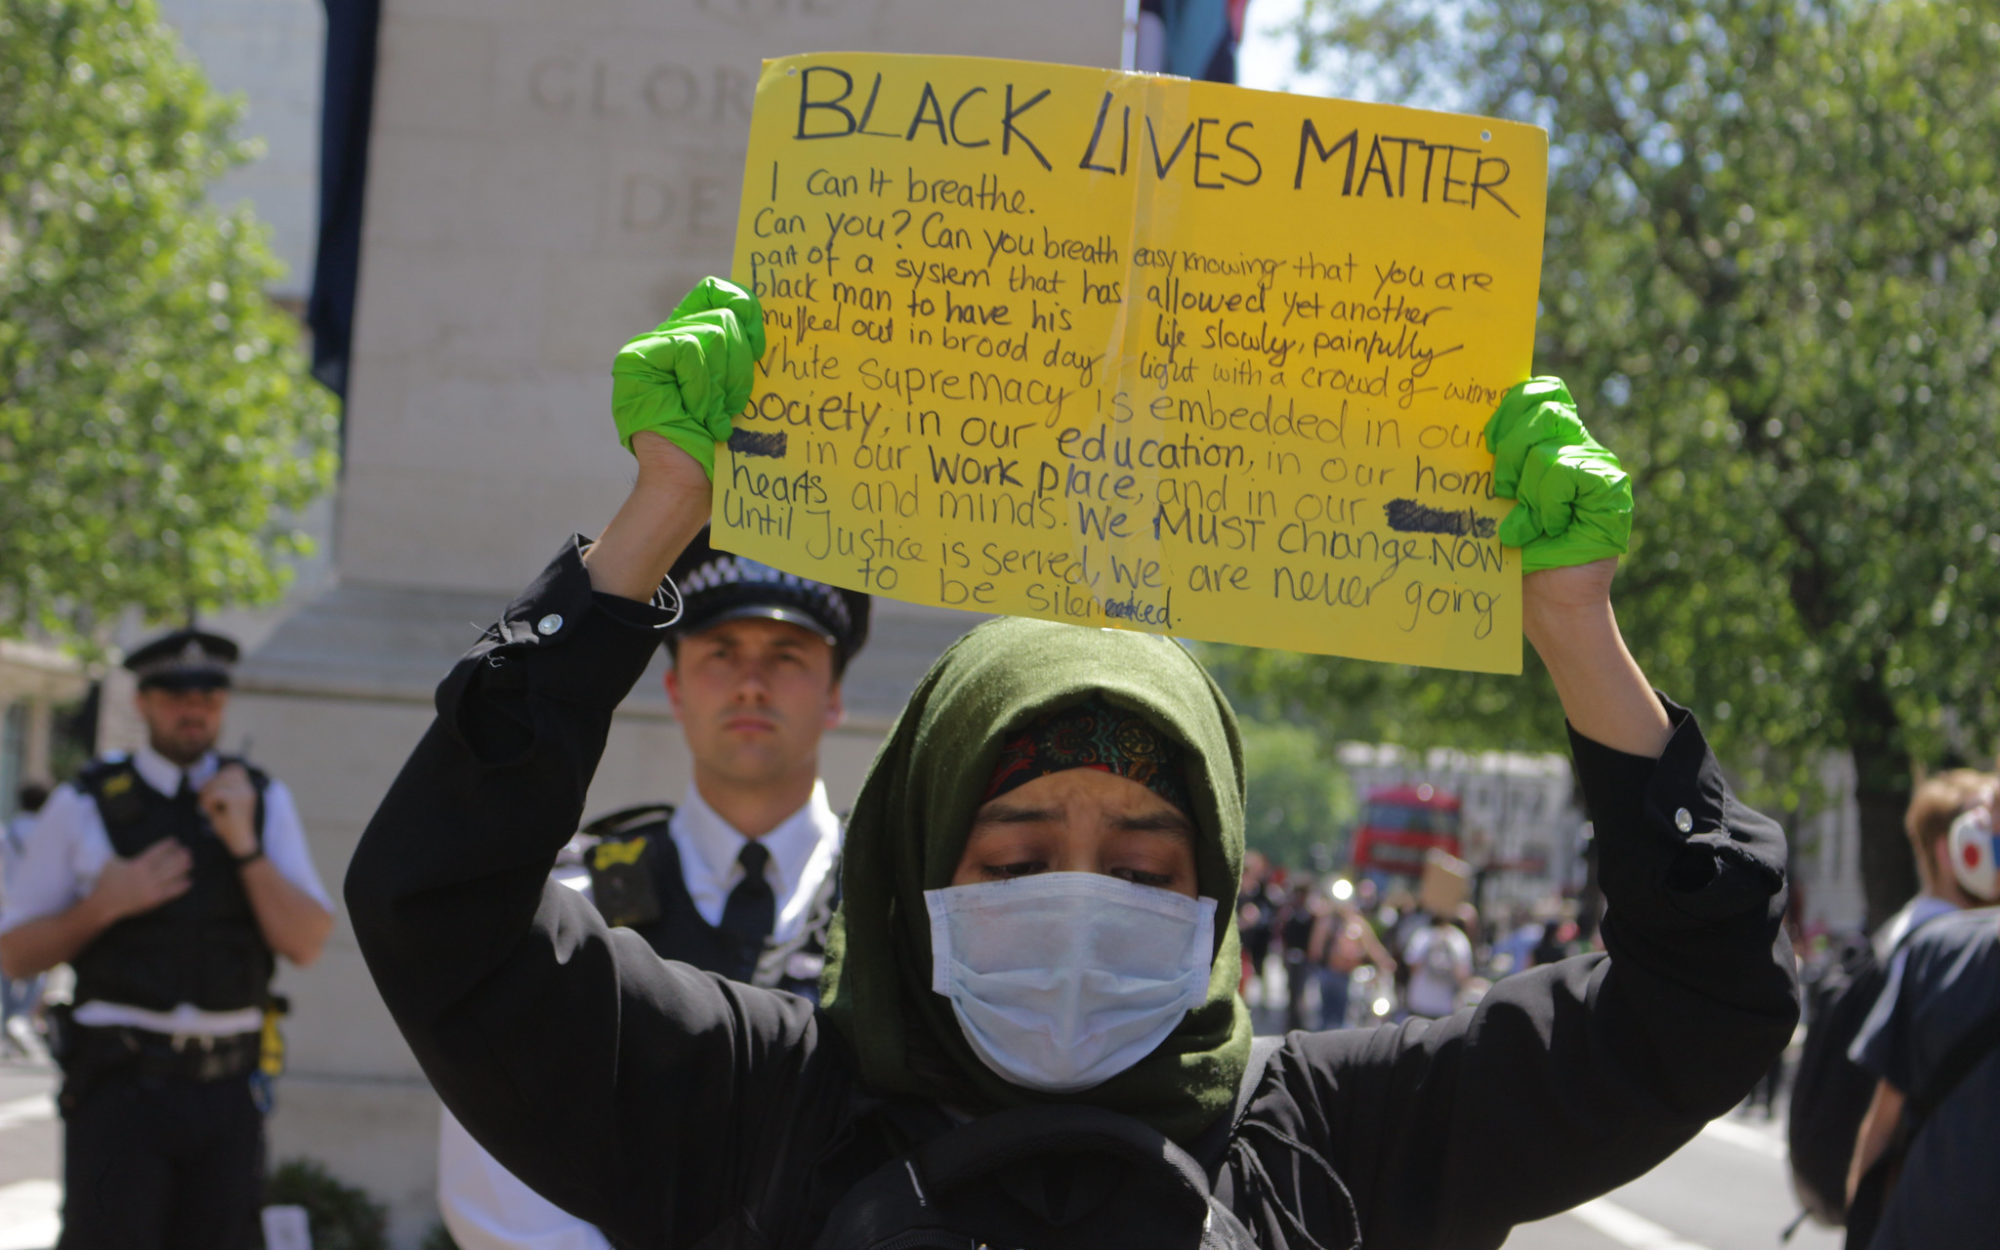 Black Lives Matter protest in London May 2020, a young Muslim woman, wearing a hijab, a face mask and green surgical gloves, looks down as she lifts a homemade BLM placard